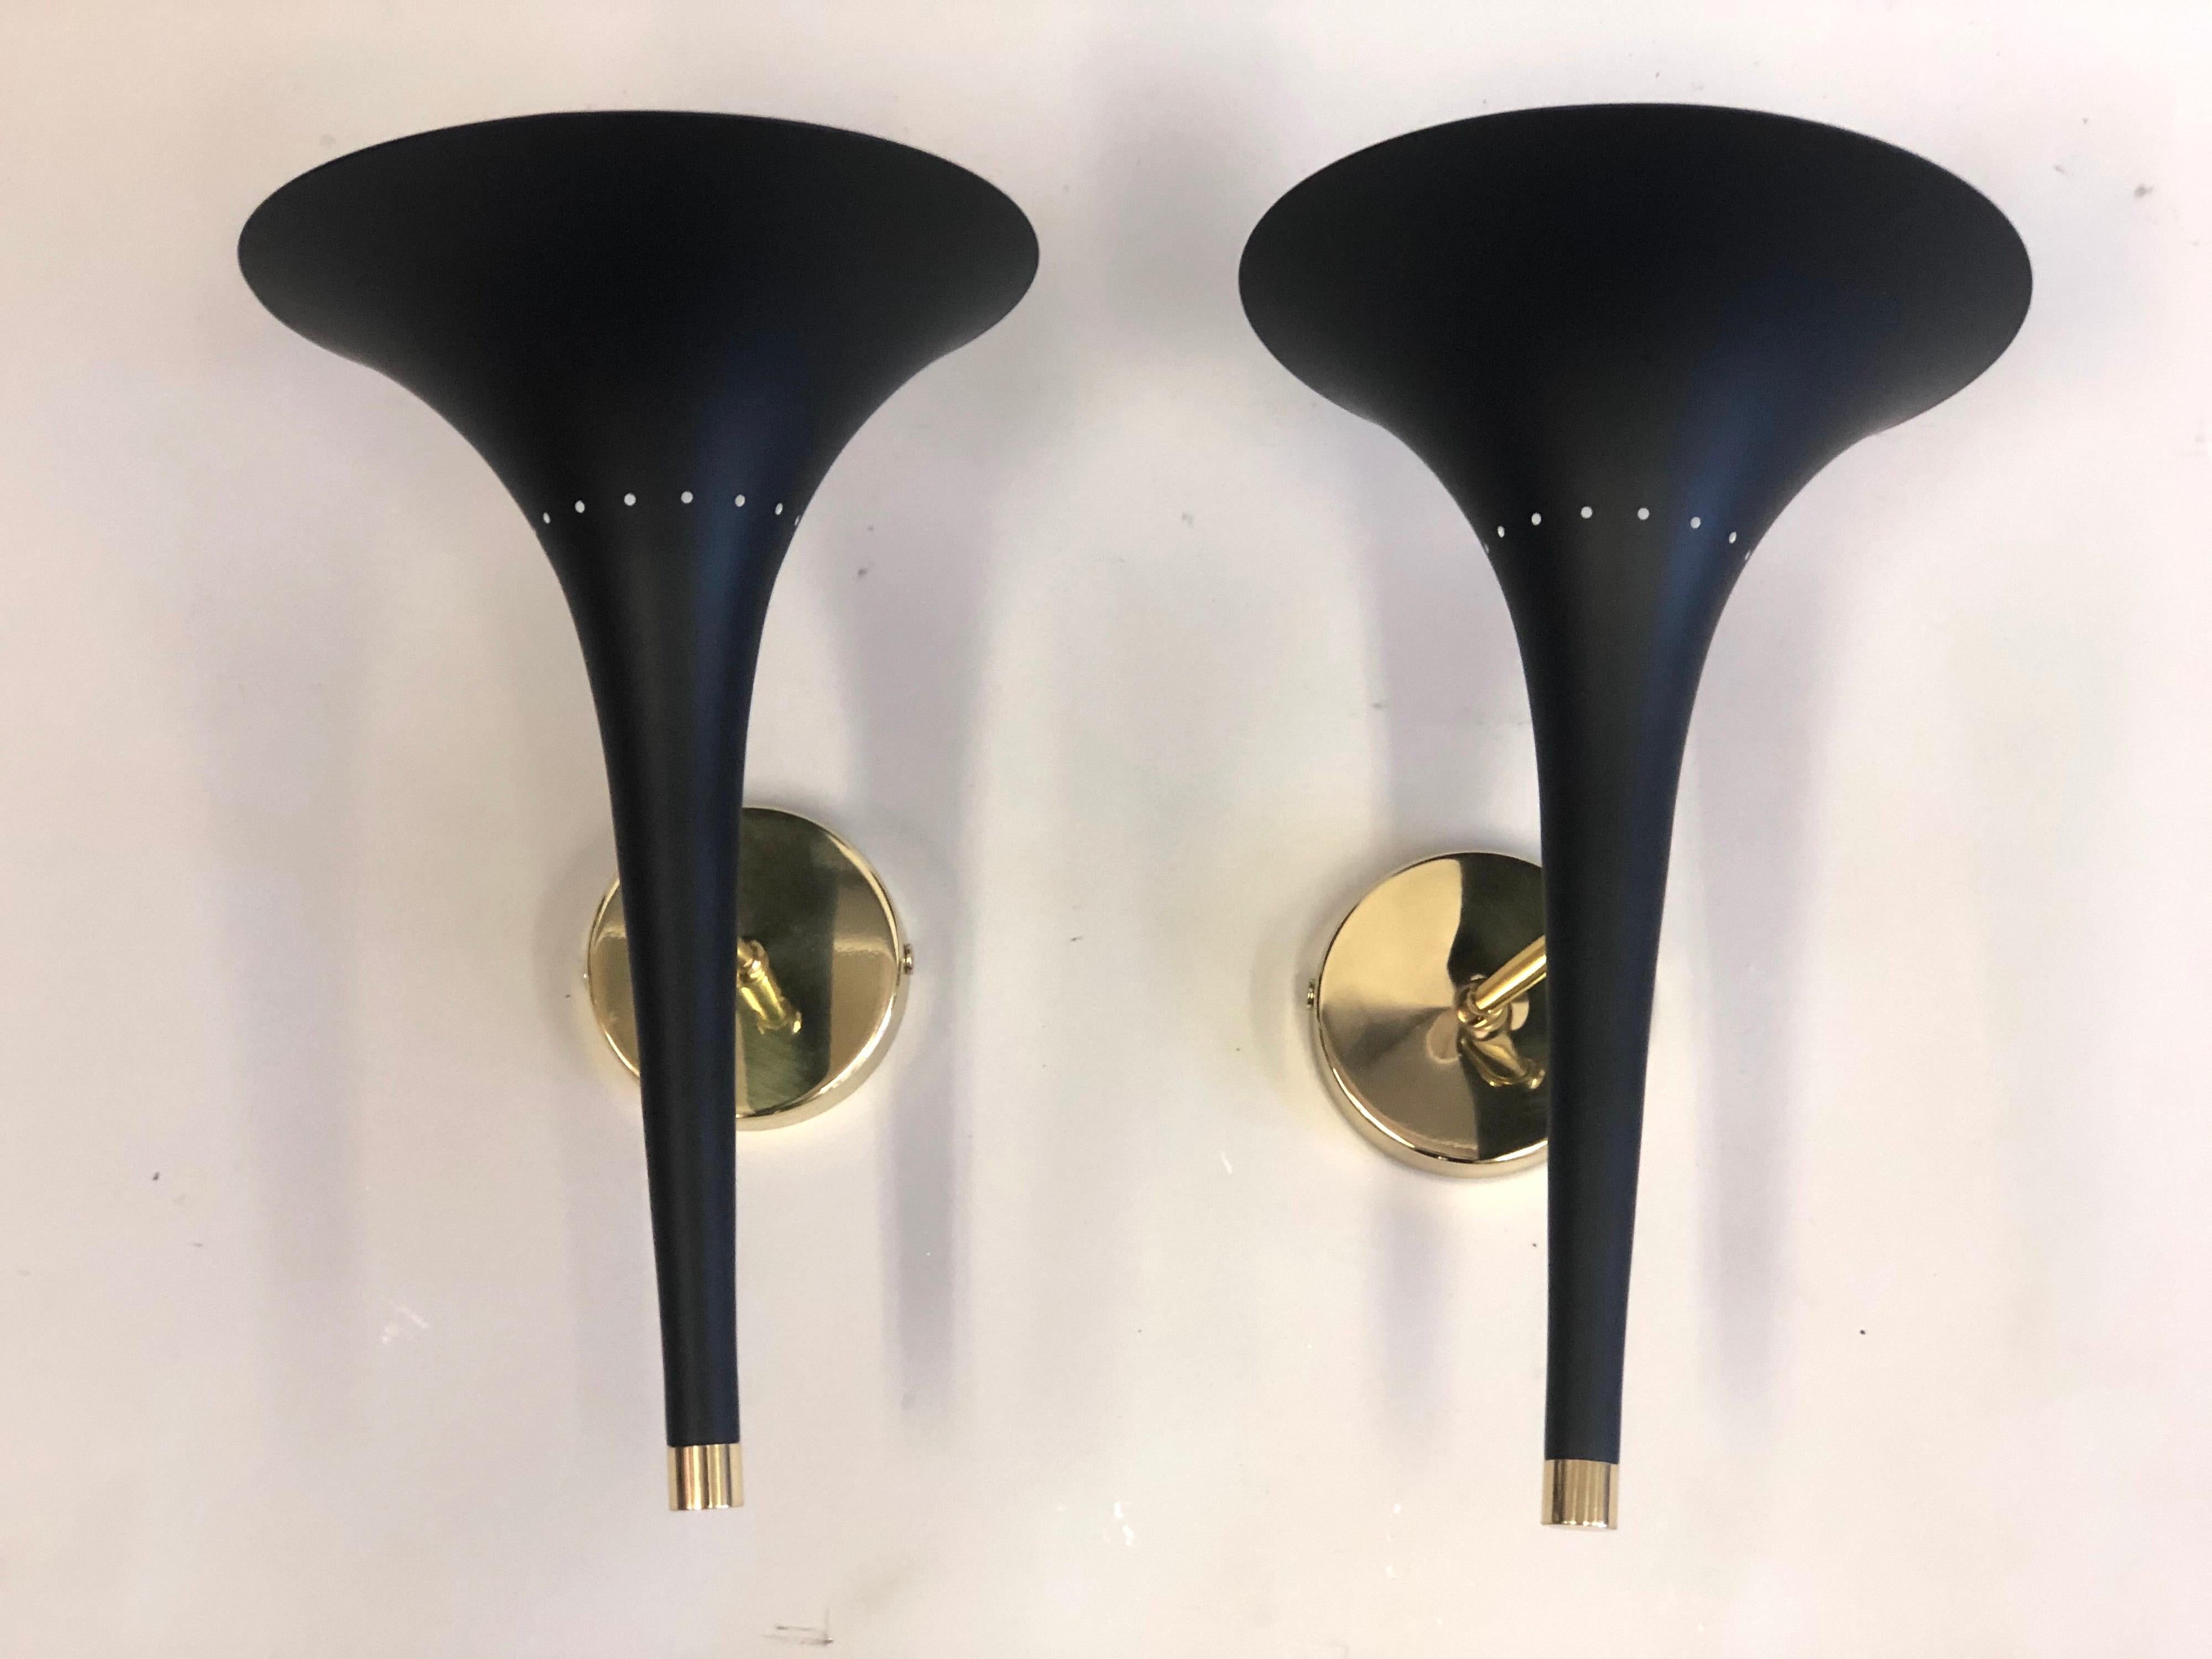 Enameled Pair of Italian Mid-Century Modern Sconces Attributed to Stilnovo For Sale